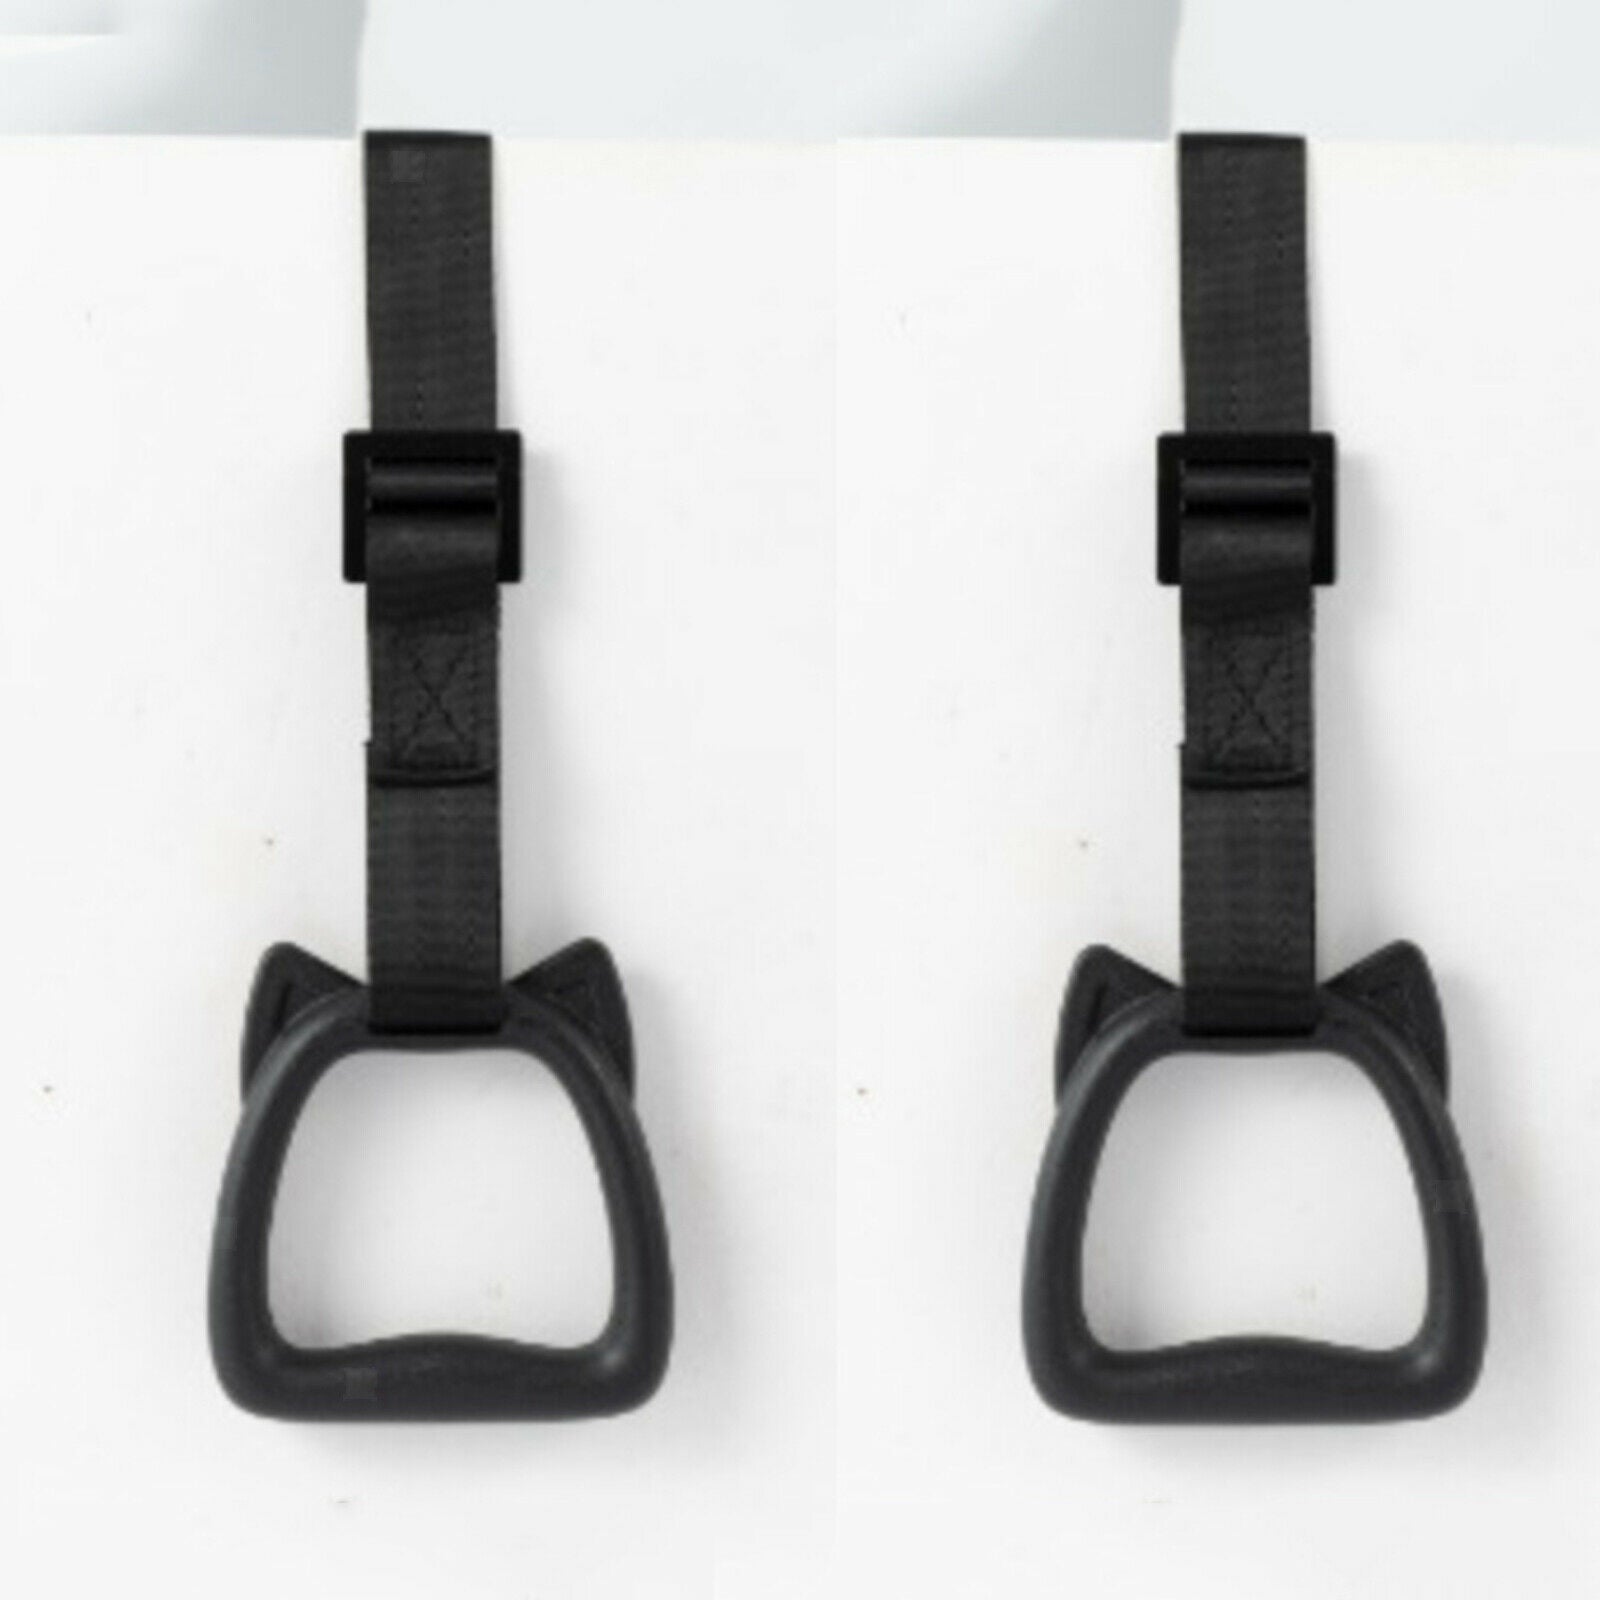 T-bar Row Pull-Up Hanging Gym Straps Handles Adjustable Strap Bar Attachment